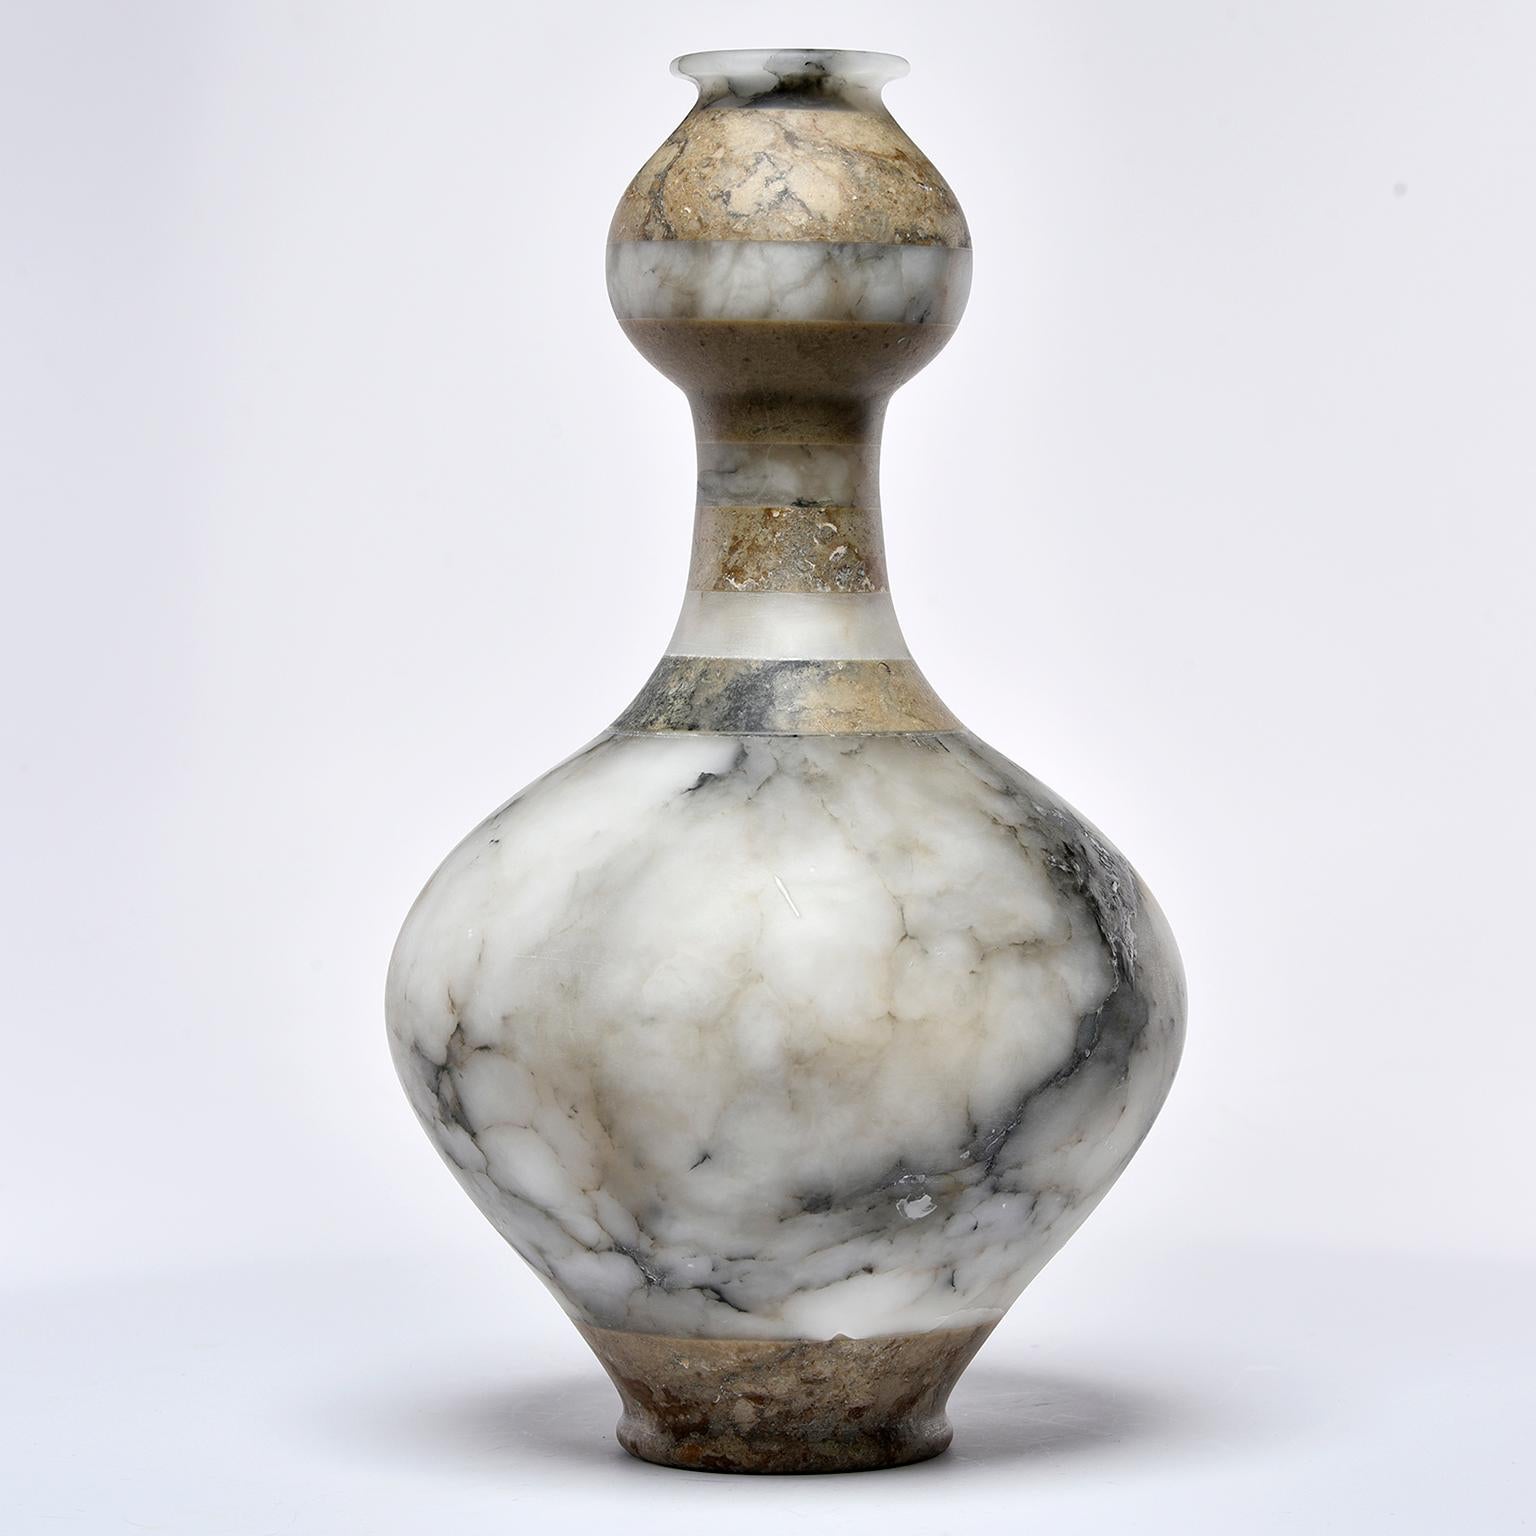 Custom made for us in Italy, this tall neck vase is made of Bardiglio marble and alabaster.